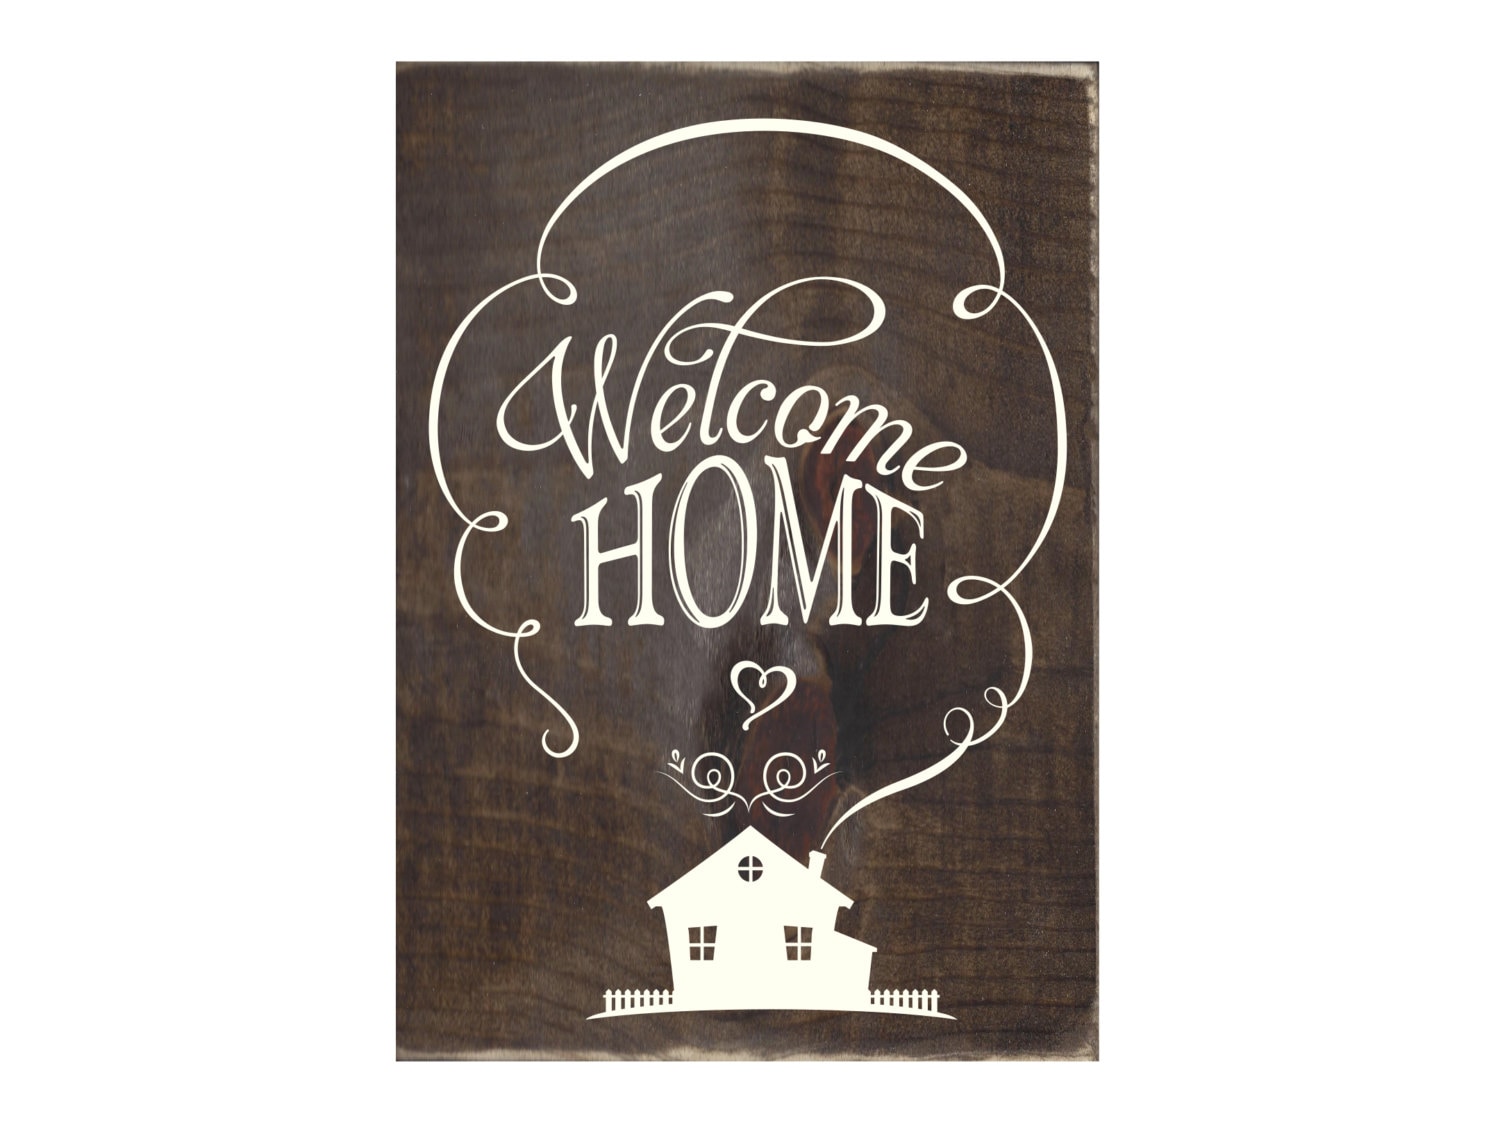 Welcome Home Rustic Wood Sign / Home Decor / Housewarming Gift